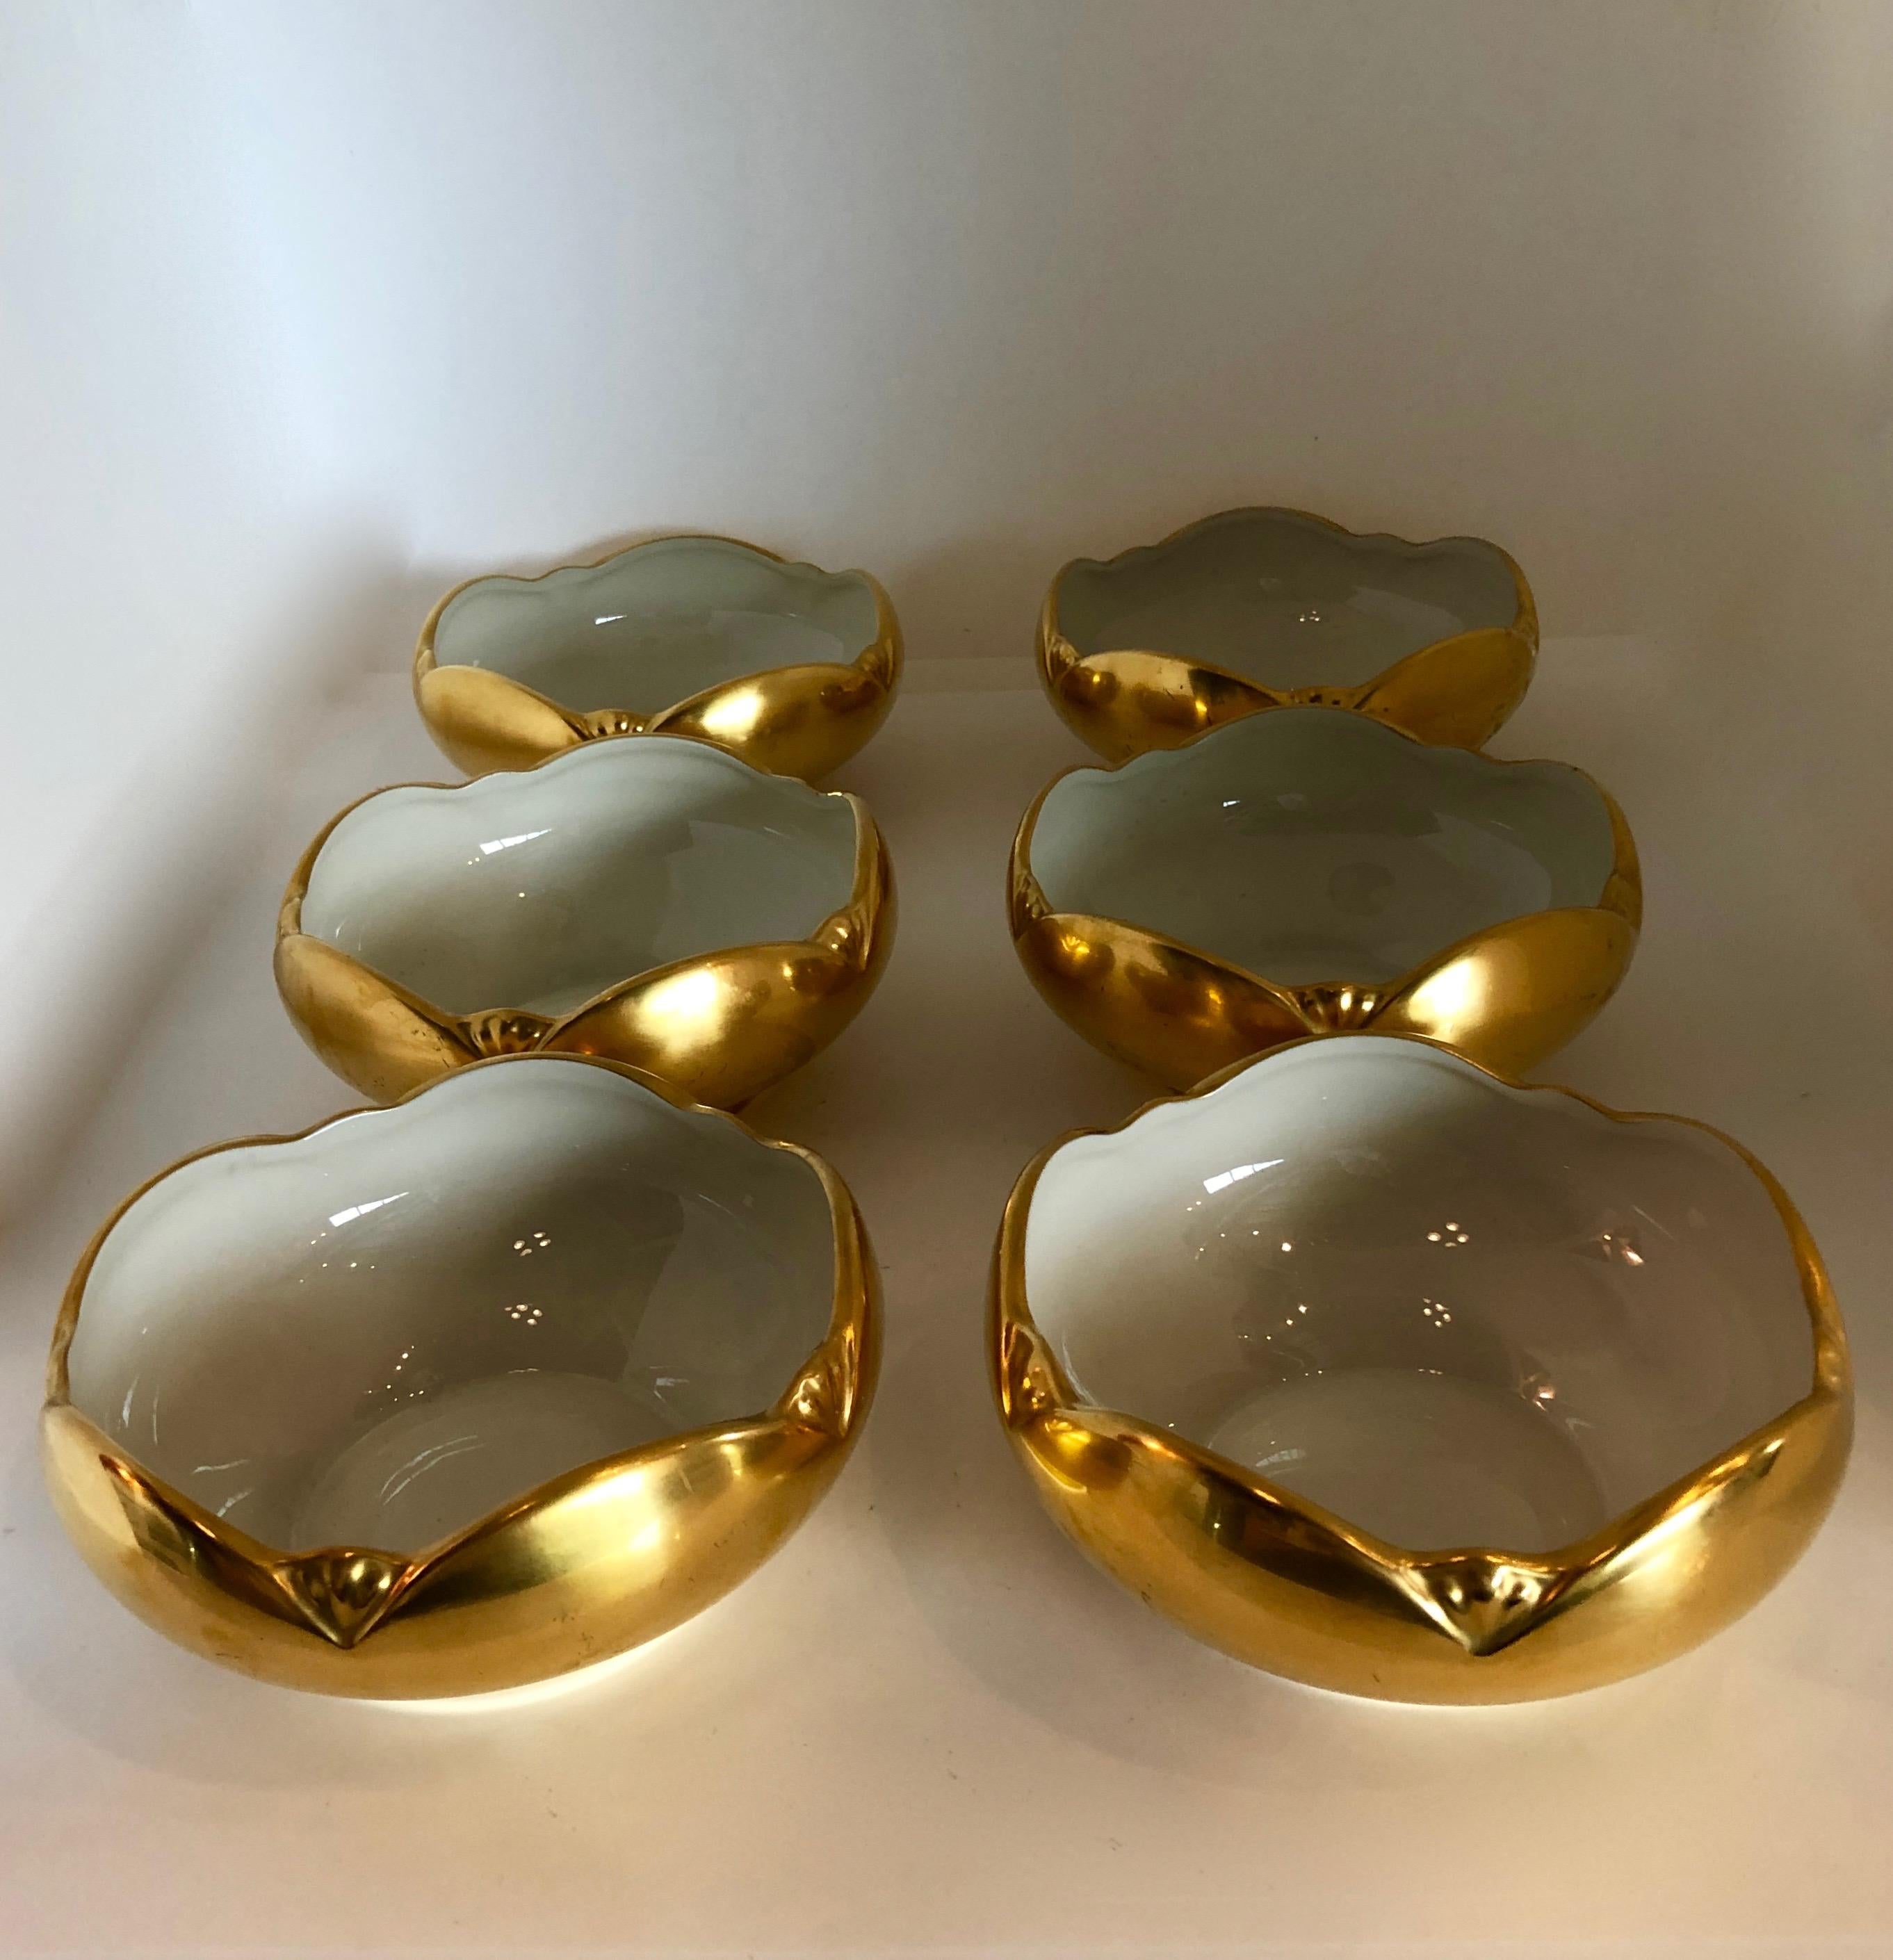 Offered is a Mid-Century Modern beyond gorgeous signed set of six Picard hand decorated ensemble gold exterior and white interior porcelain bowls. The set of six bowls are bone china that has been hand decorated with a gilt overlay. The bowls have a